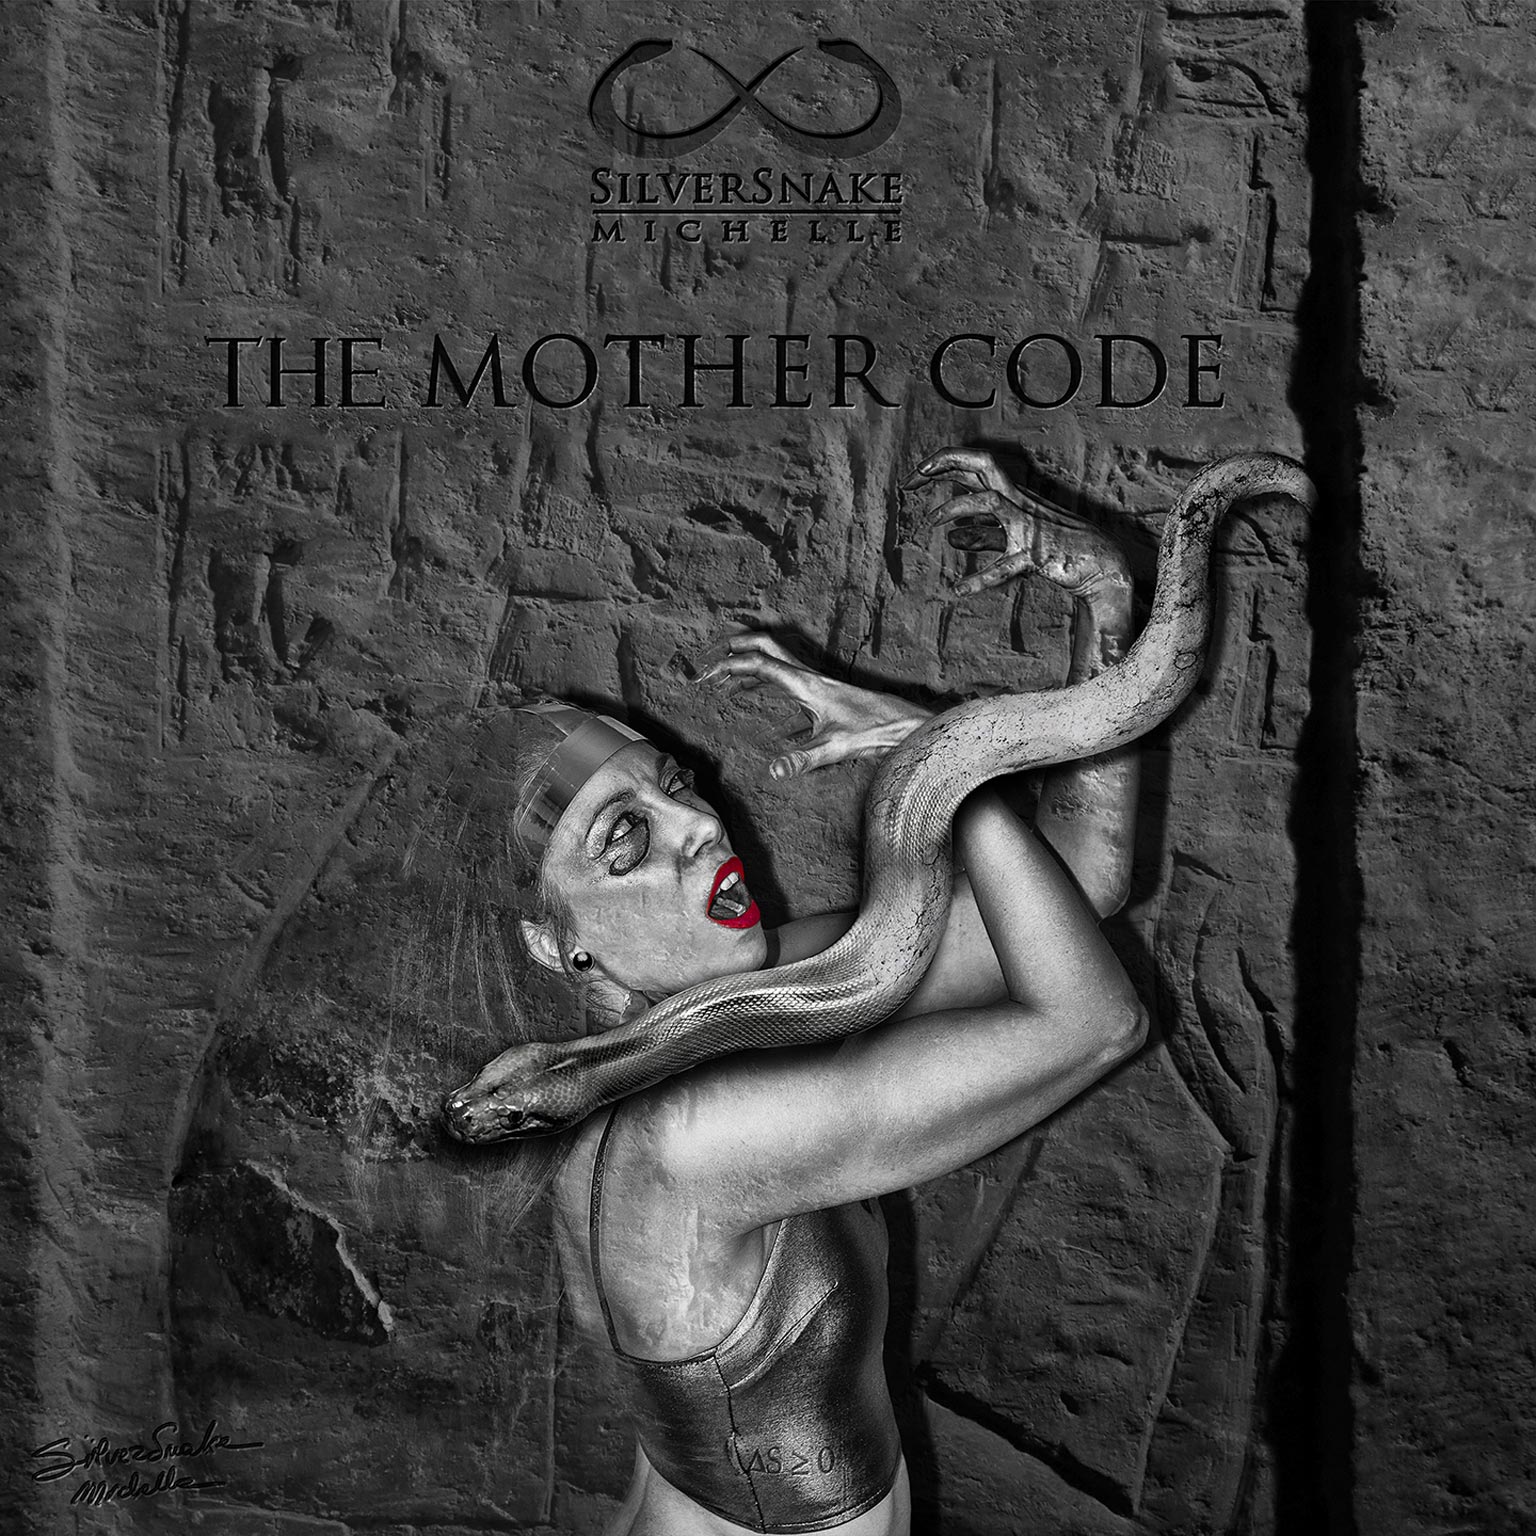 Silversnake Michelle  – “The Mother Code”